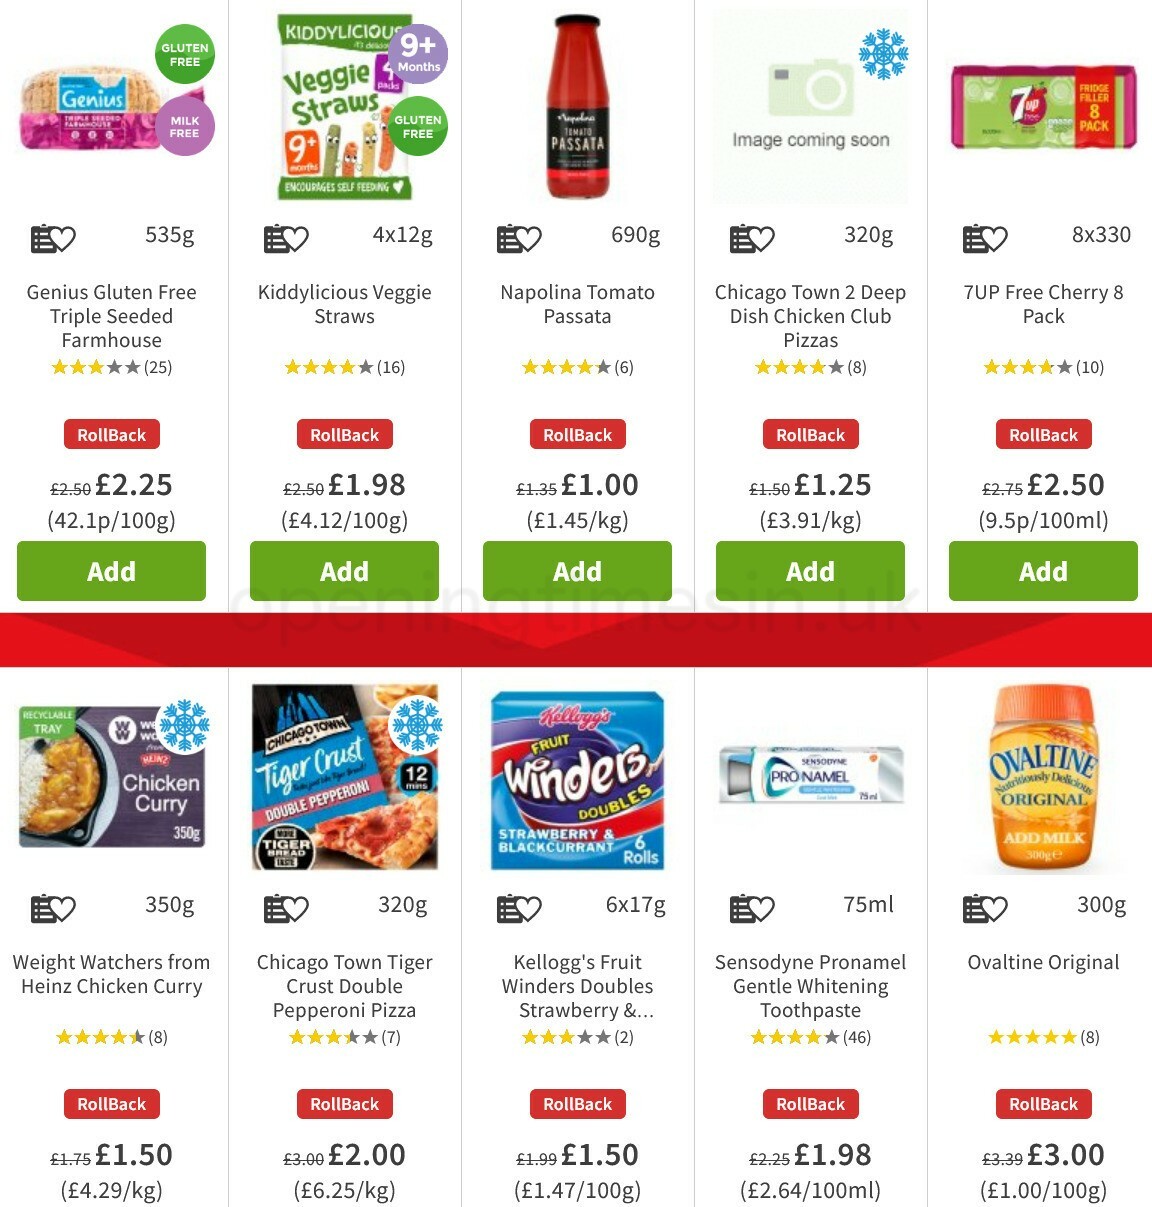 ASDA Offers from 19 February